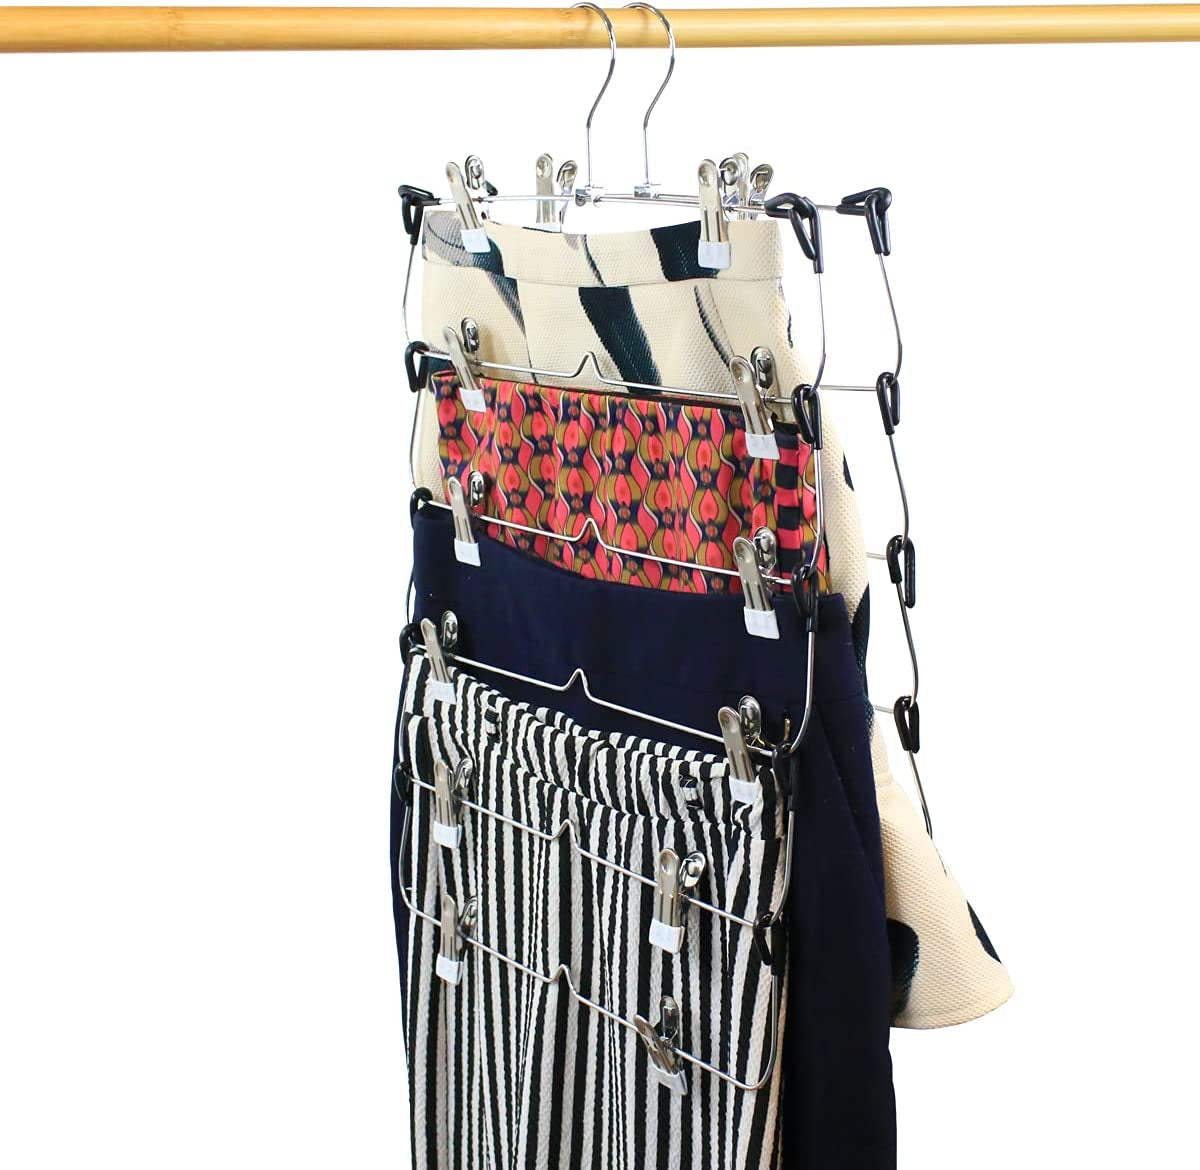 6 Tier Trouser Hangers with Clips,  2 Pack Strong & Durable Chrome Metal Skirt Hangers - Space Saving, Multi Hanger with Non Slip Adjustable Clip for Trousers, Hang Skirts Pants Jeans